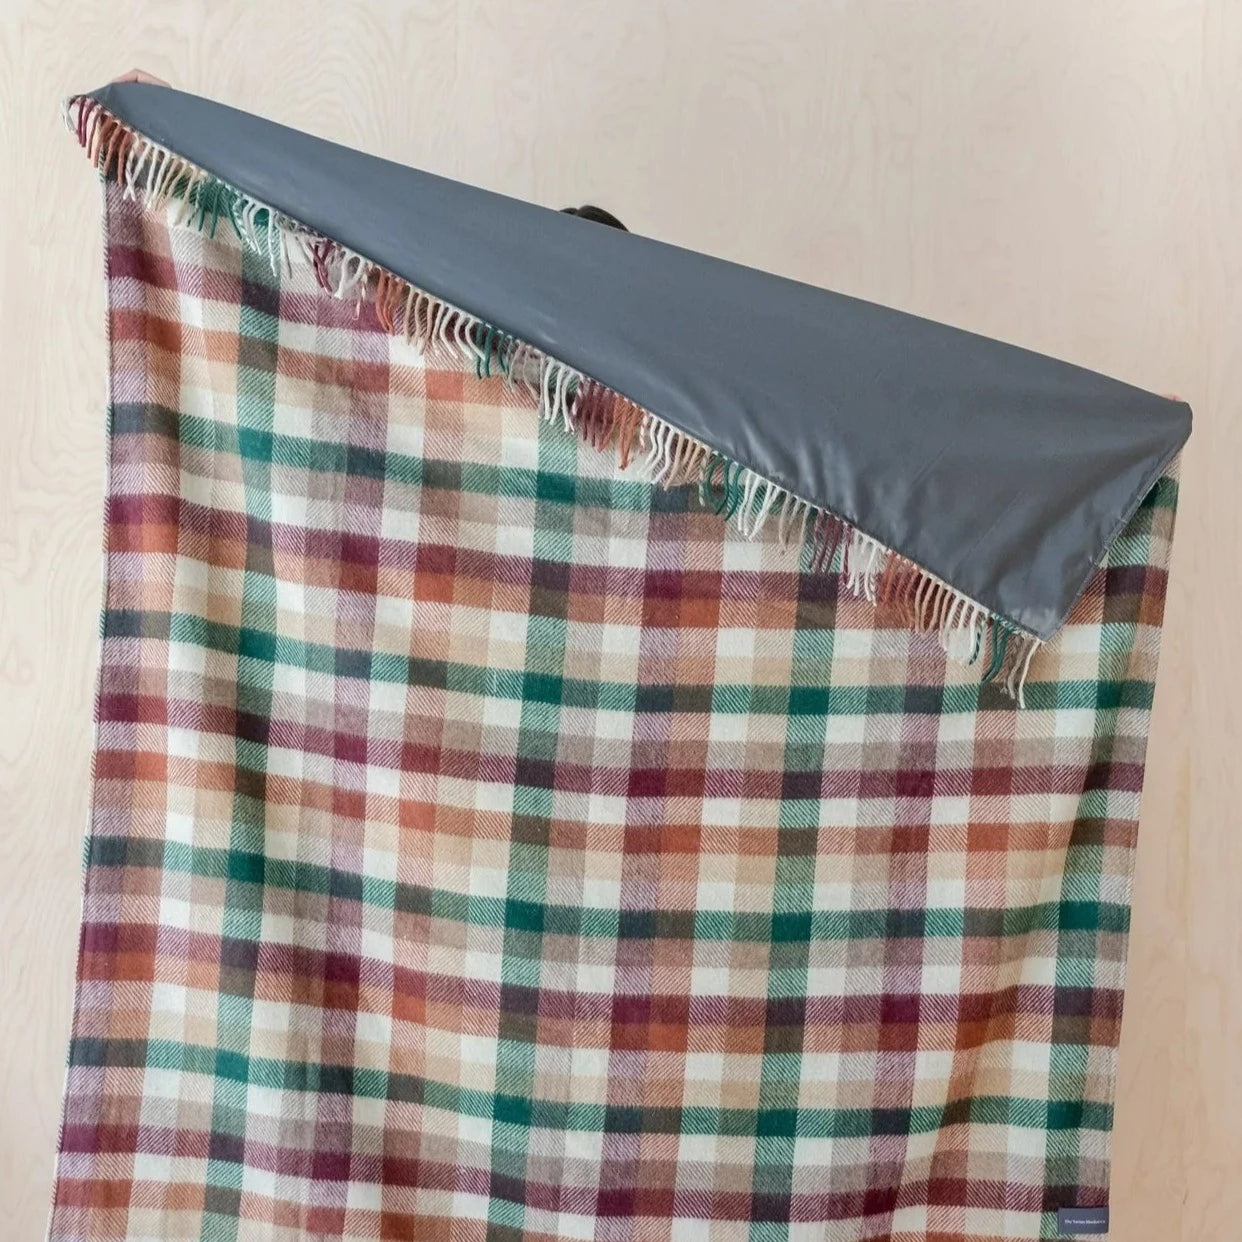 Recycled Wool Waterproof Picnic Blanket in Forest Check